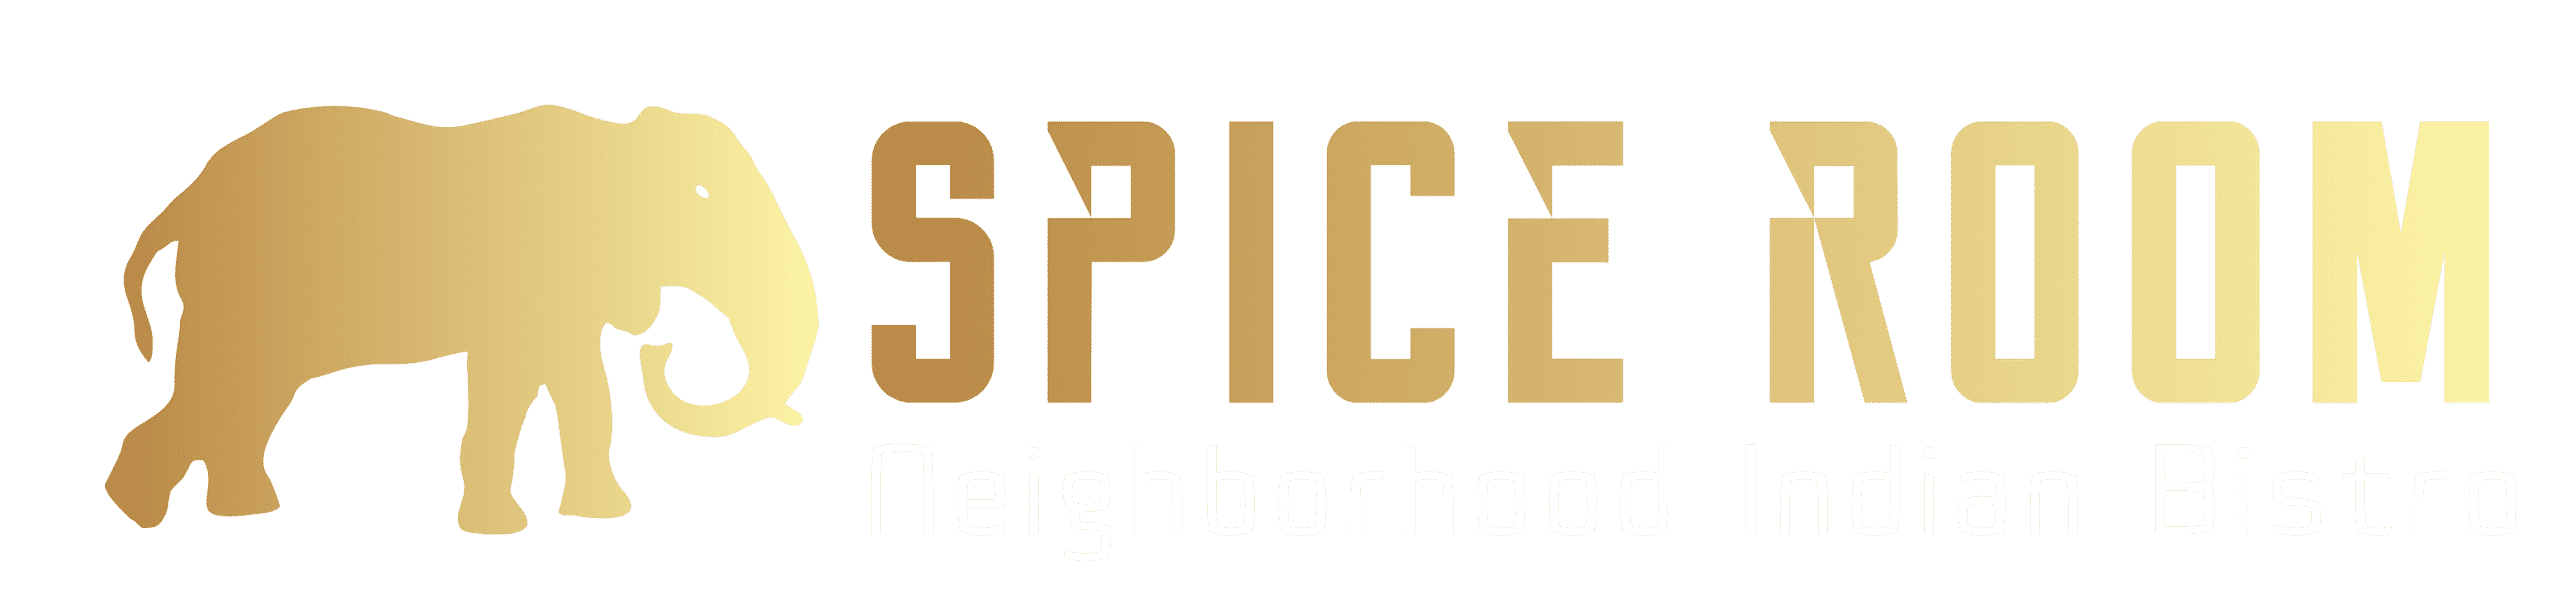 SPICE ROOM